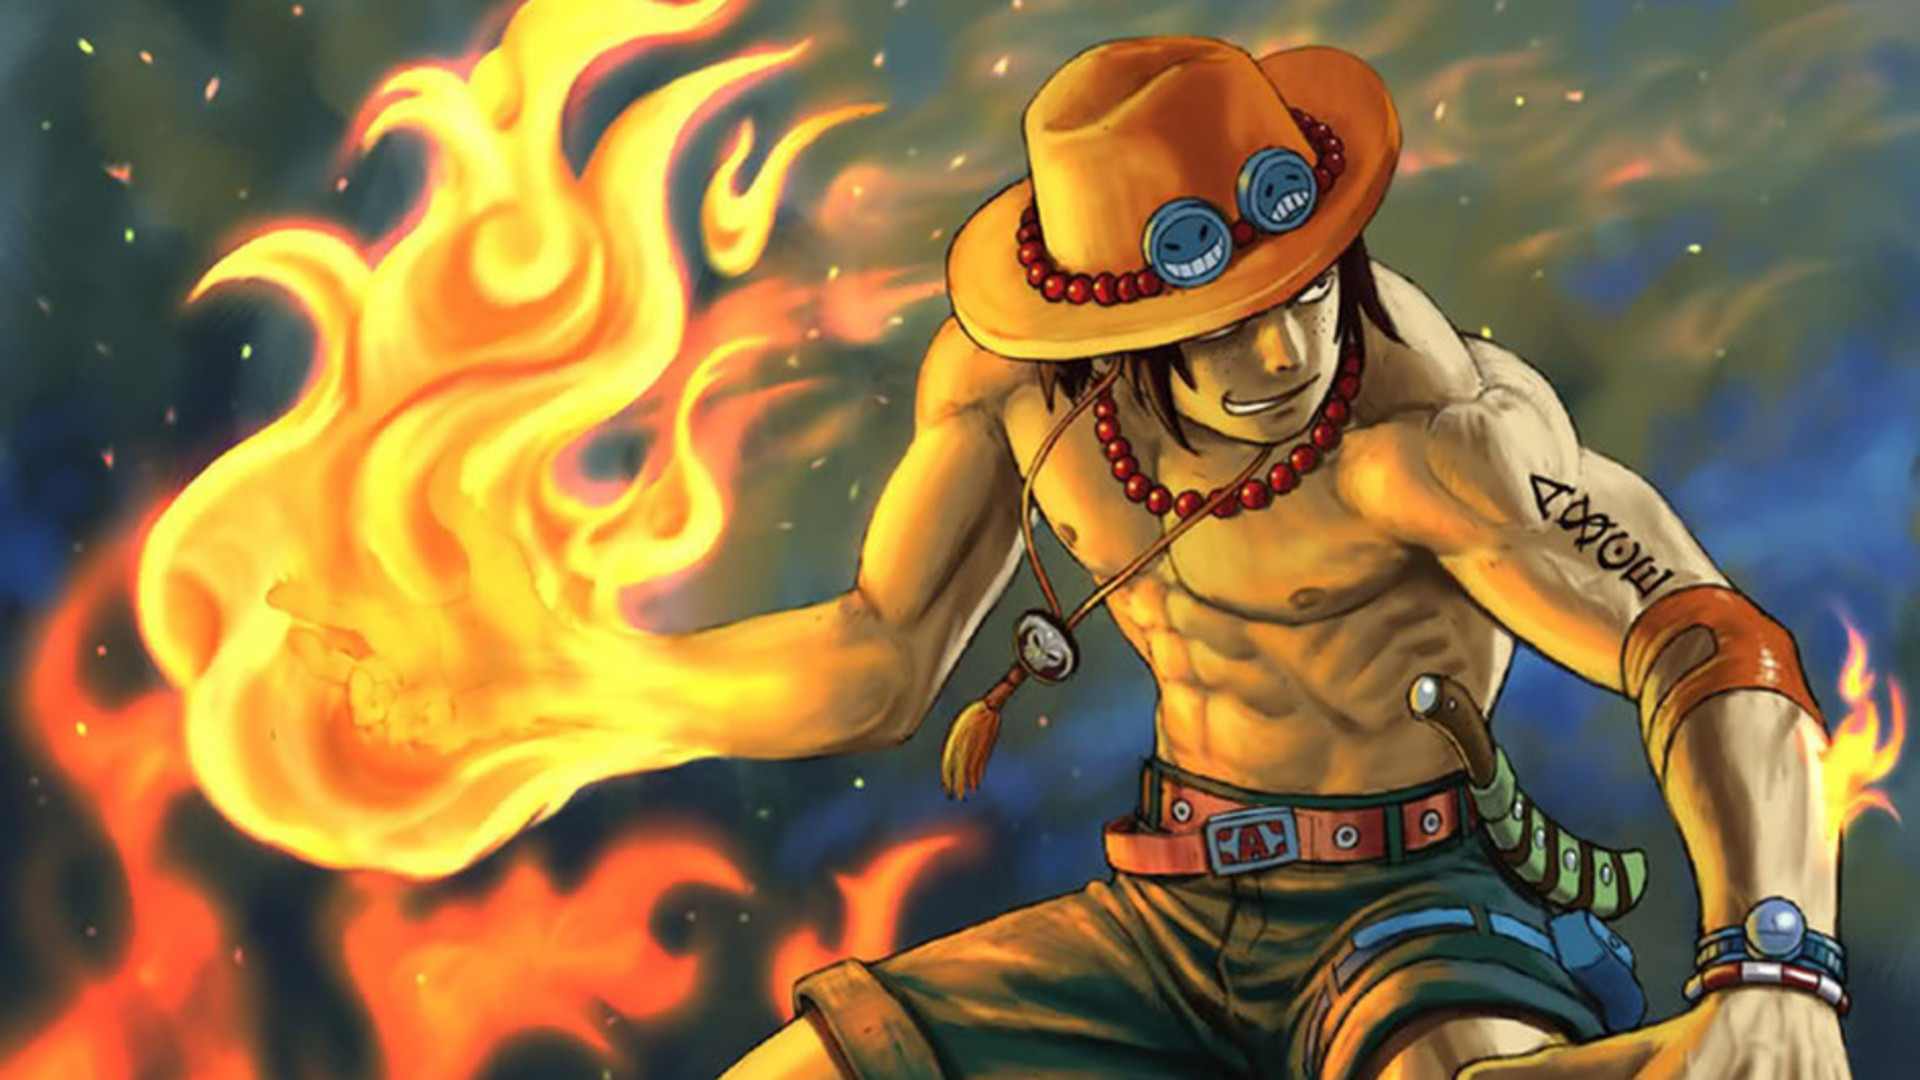 One Piece Ace Wallpapers HD 10379 - HD Wallpapers Site